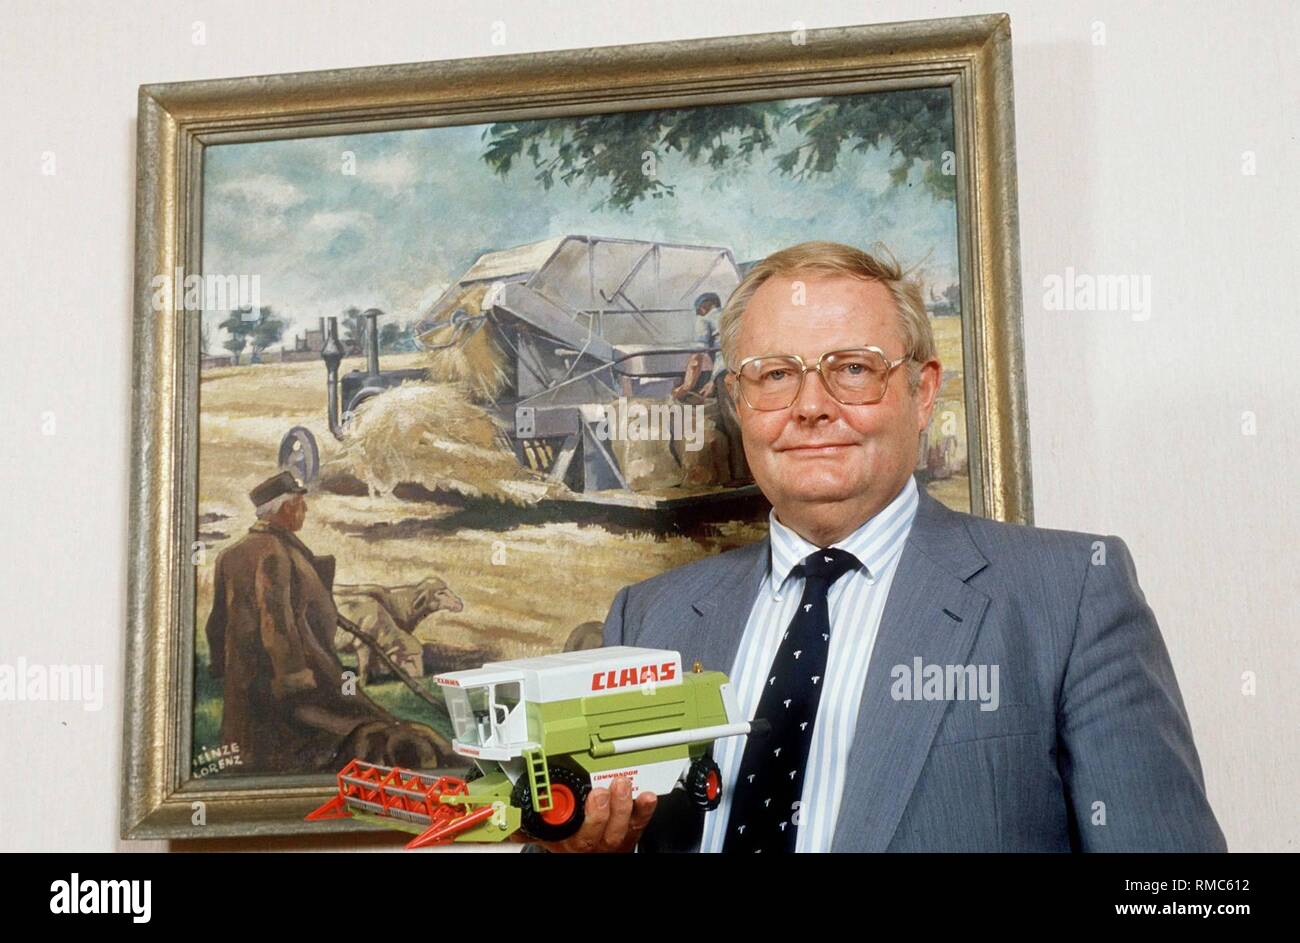 Helmut Claas, head of the agricultural machinery manufacturer Claas in Harsewinkel near Guetersloh (North Rhine-Westphalia), celebrates his 75th birthday on 16 July, 2001. Since 1975, when he took over the family business from his father August, Helmut Claas has turned the company into a global corporation with more than two billion Marks in sales and 5,600 employees. His inventions revolutionized agricultural engineering technology. However, the amateur hunter stayed in Westphalia and celebrated his 75th birthday modestly in the circle of closest family and friends. Stock Photo